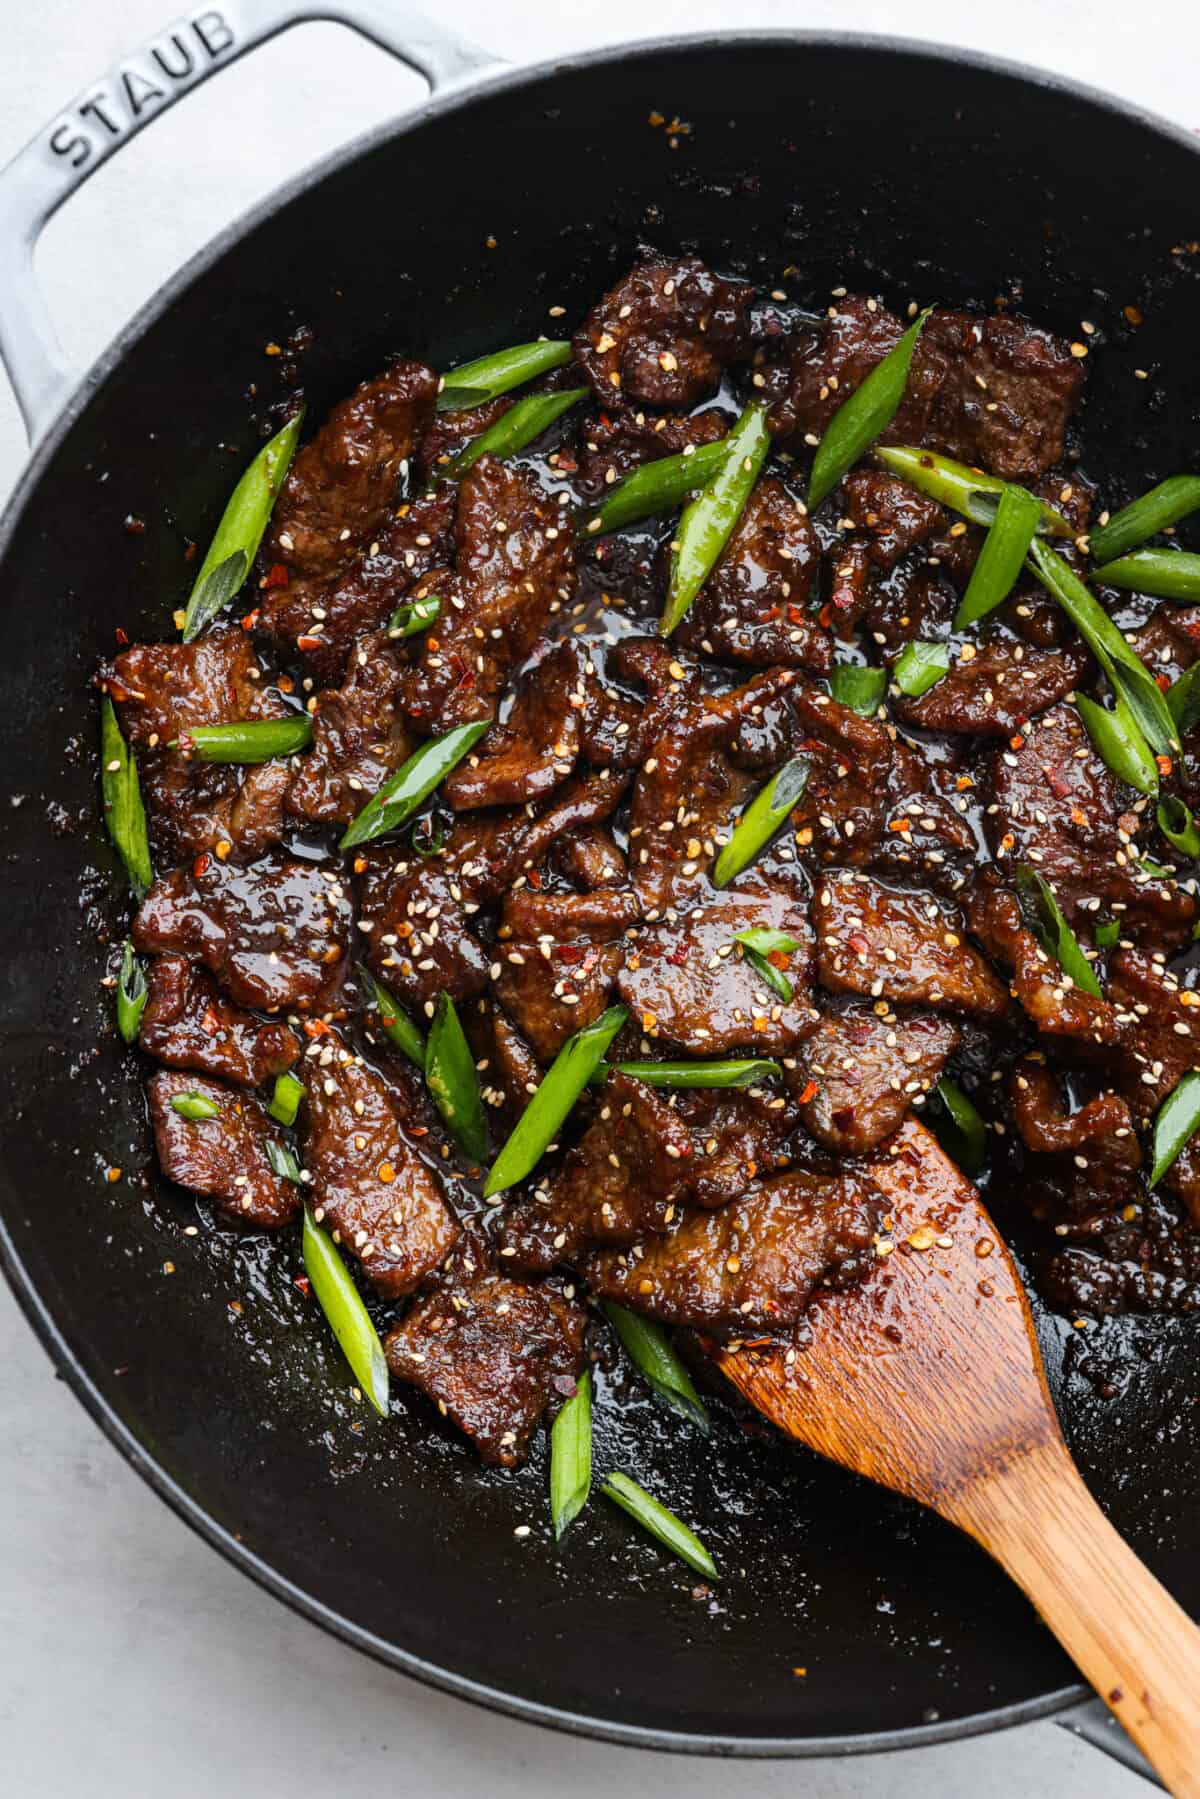 Top-down view of cooked beef and green onions in a skillet.